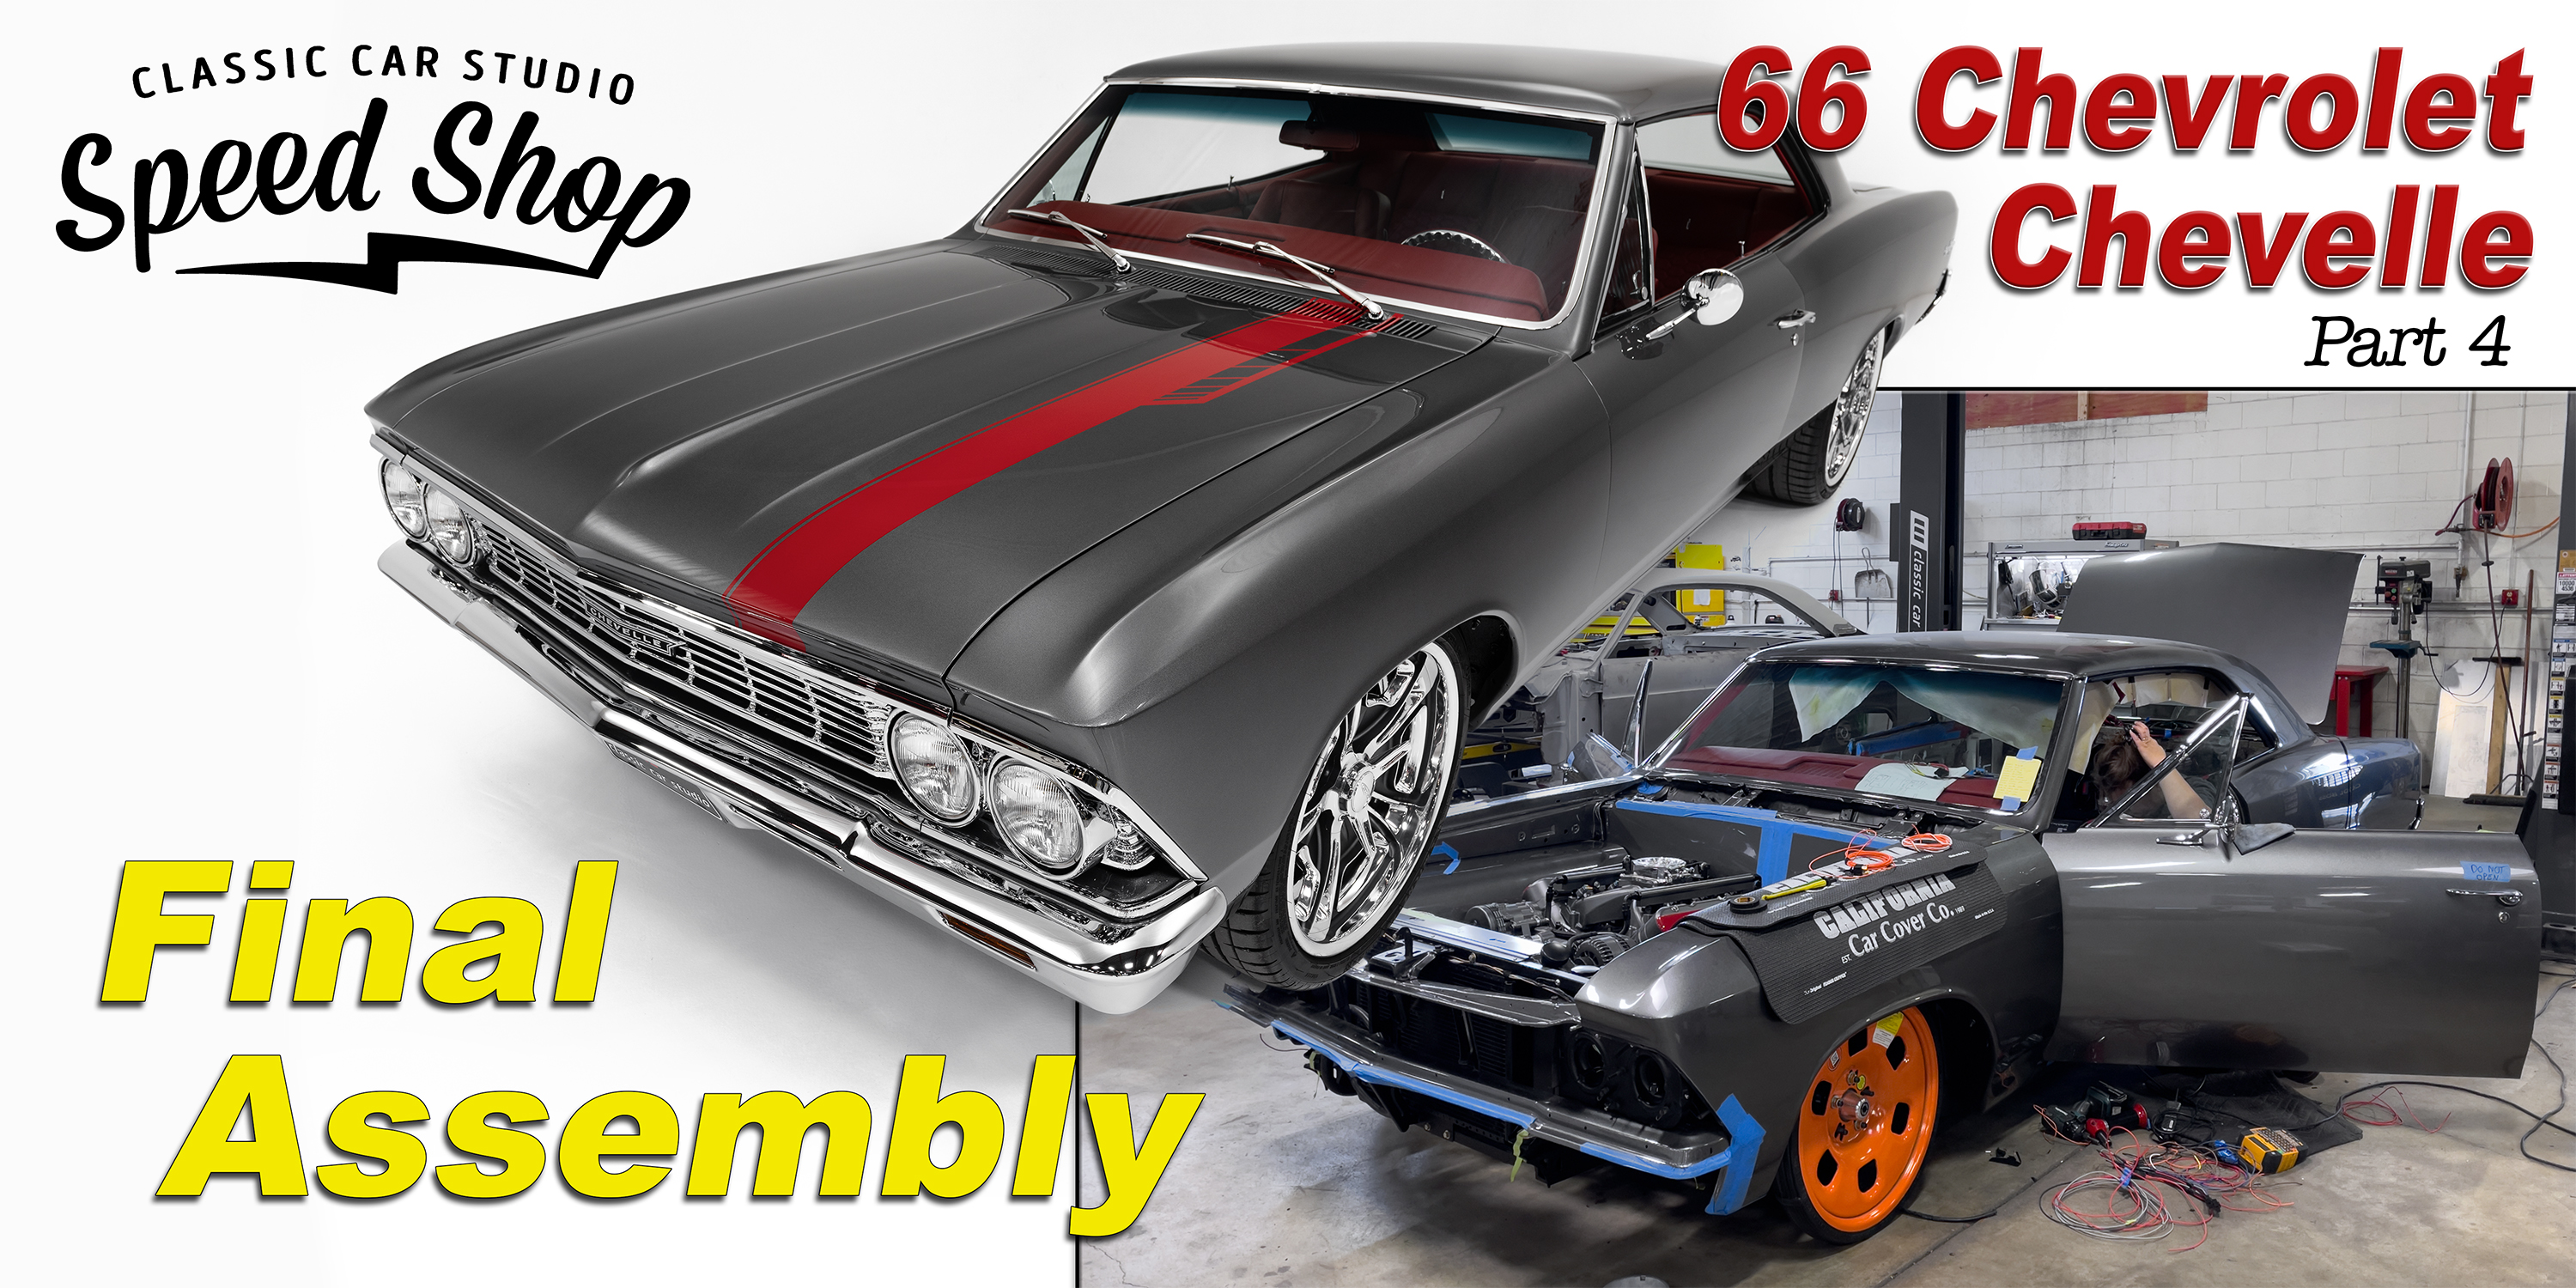 66 Chevelle • Part 4 Final Assembly • YouTube Thumb 2x1